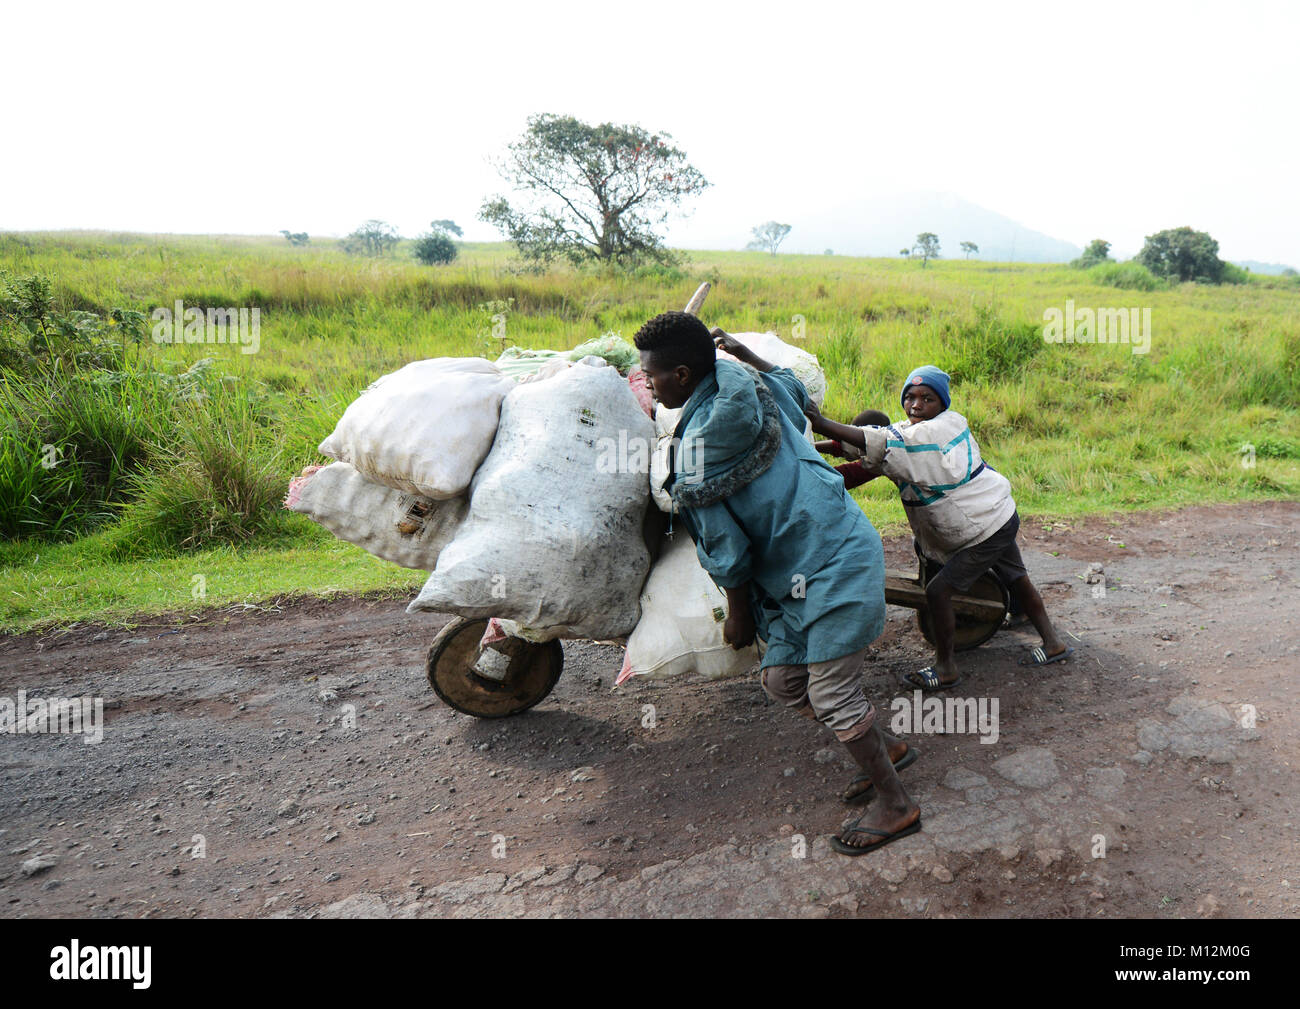 Chukudu is a traditional wooden bike used for transporting goods in Eastern Congo. Stock Photo